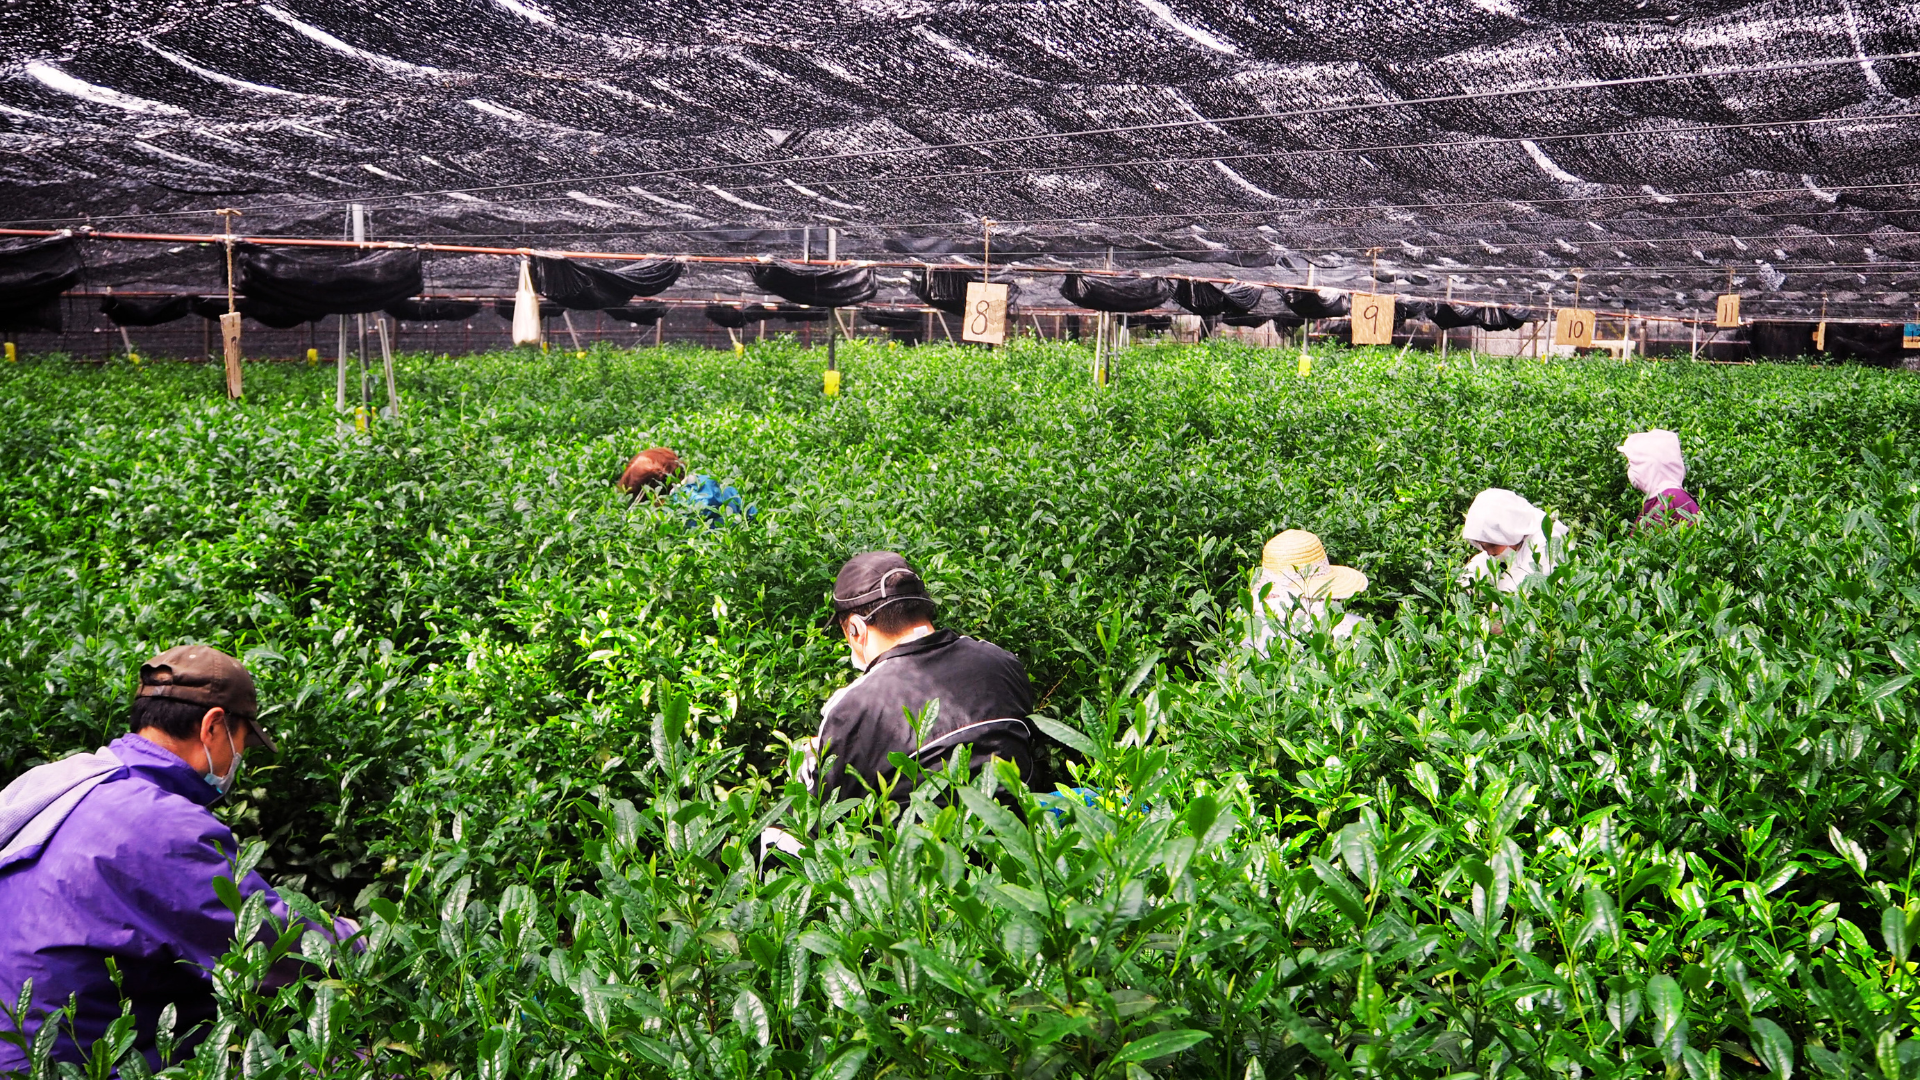 Tea pickers picking matcha green tea leaves under a shaded roof